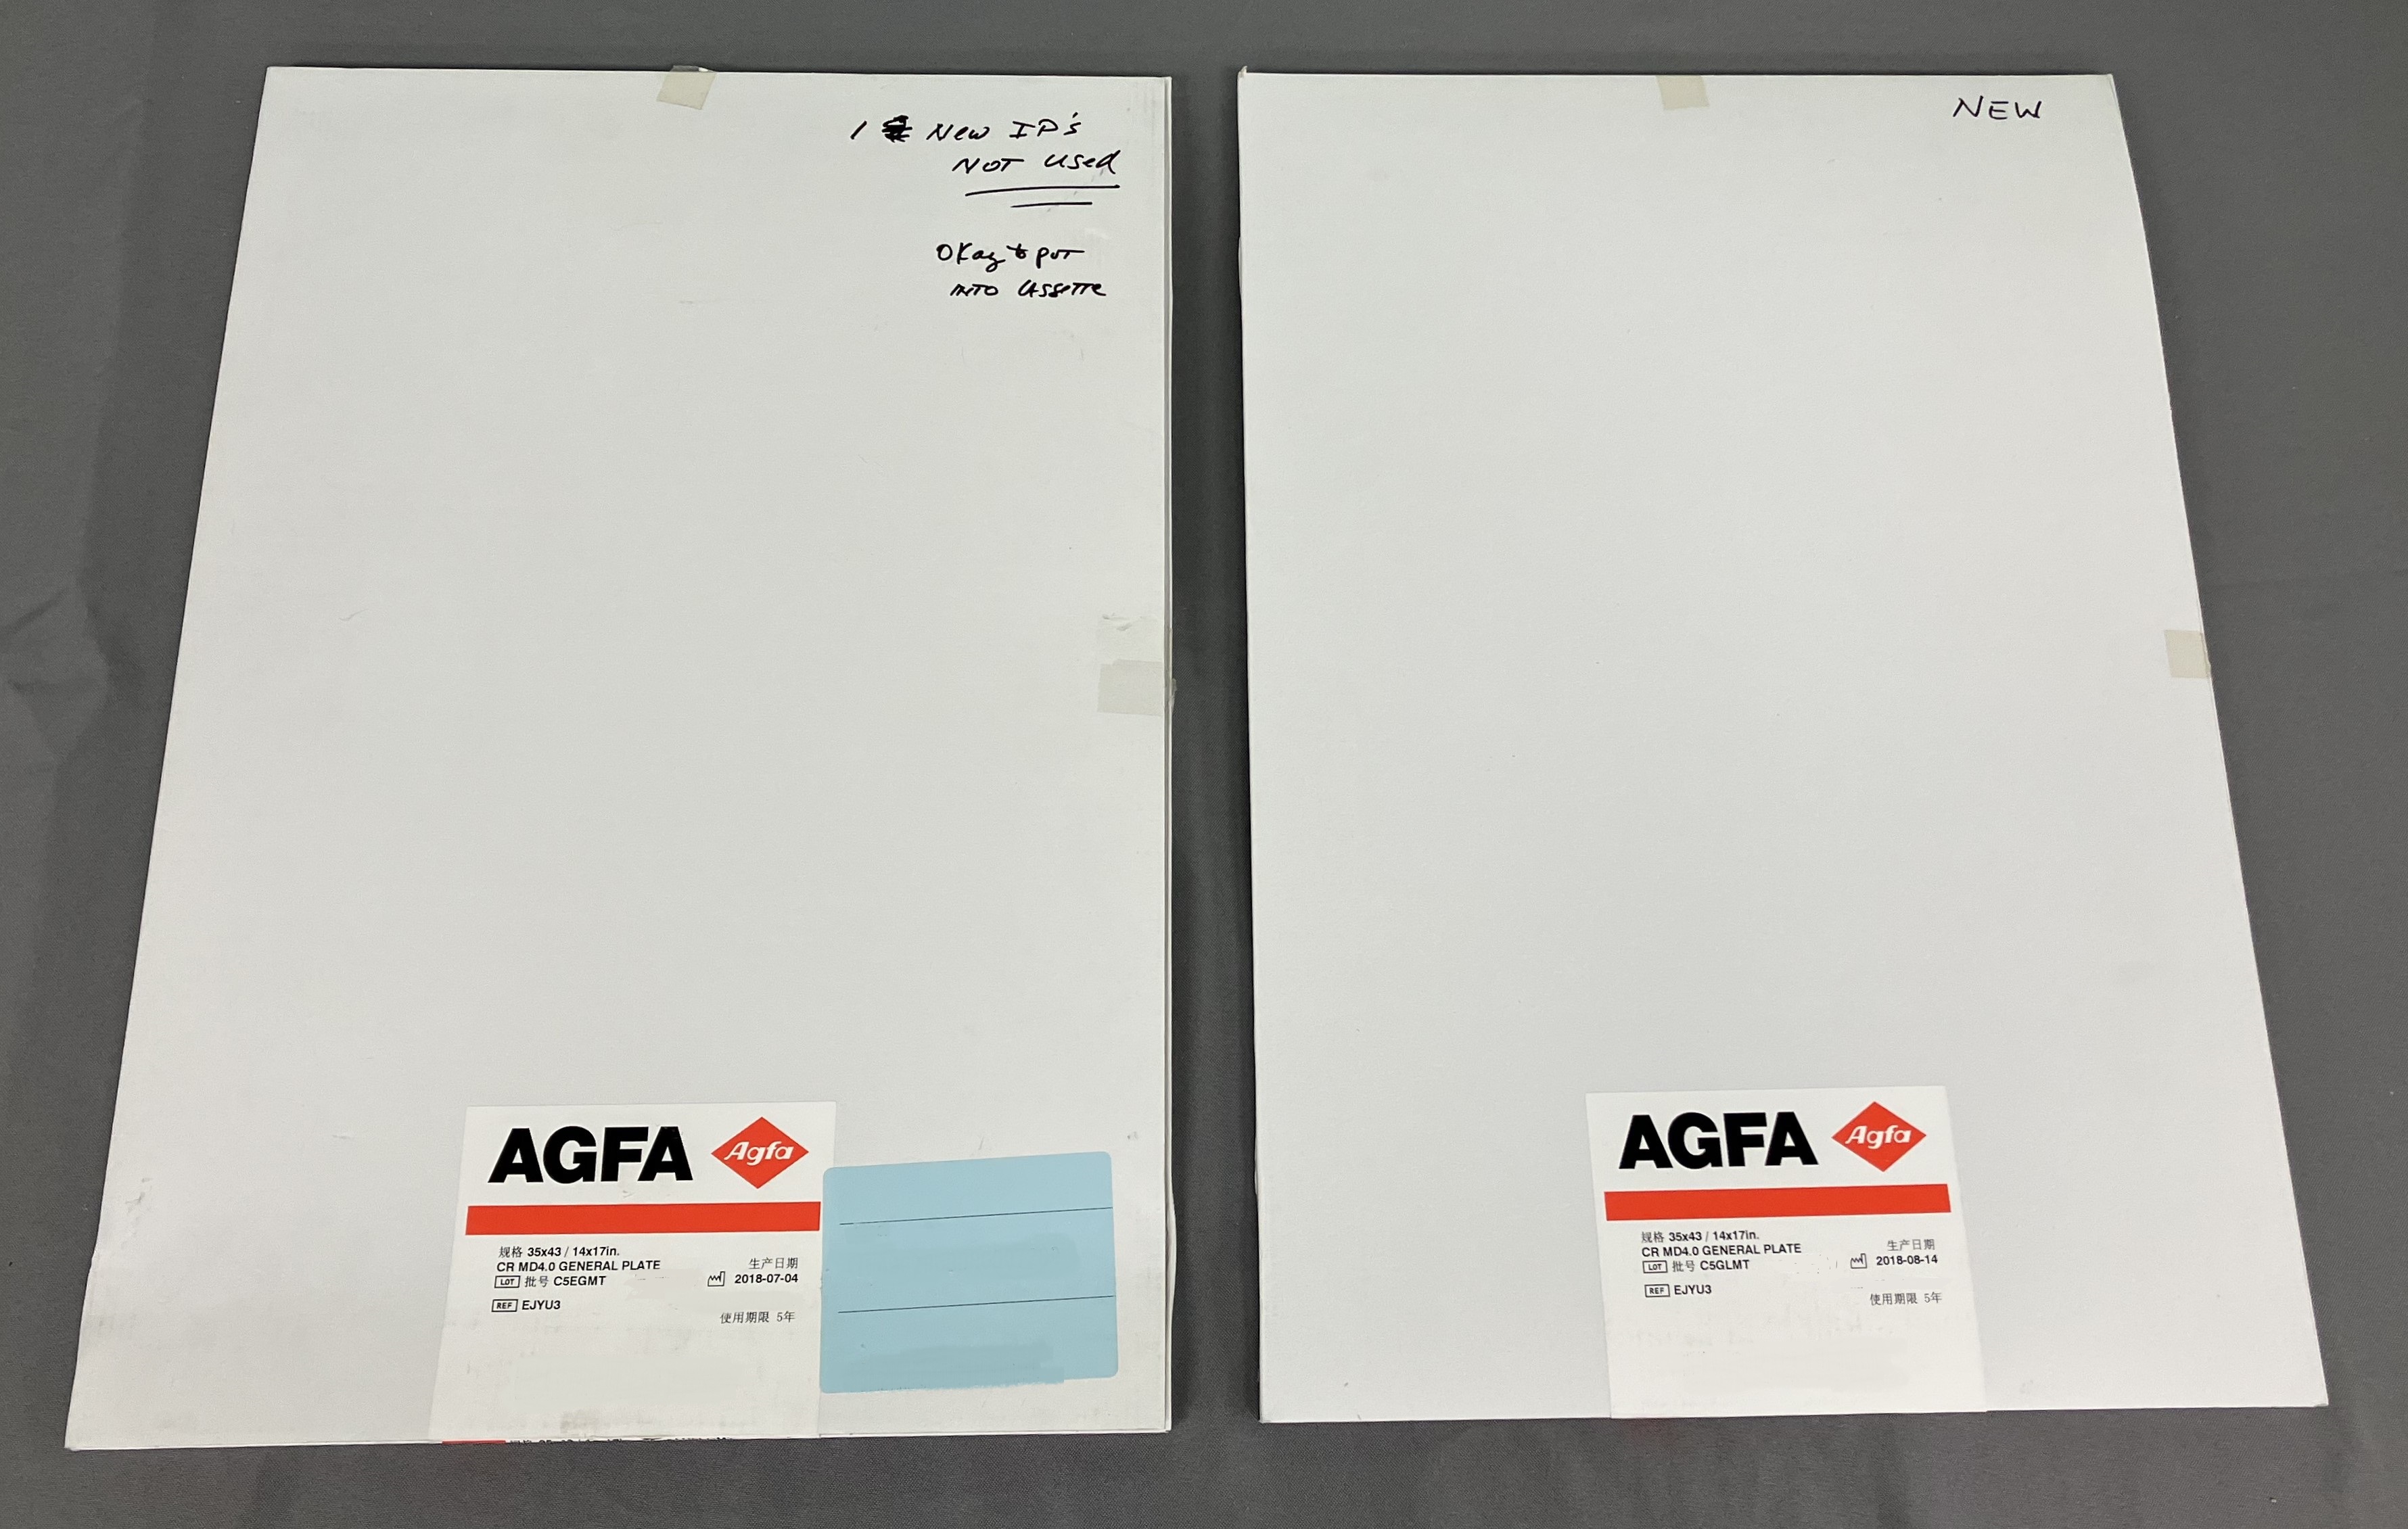 AGFA CR MD4.0 General Imaging Plate 14x17 in REF: EJYU3 – Lot of 2